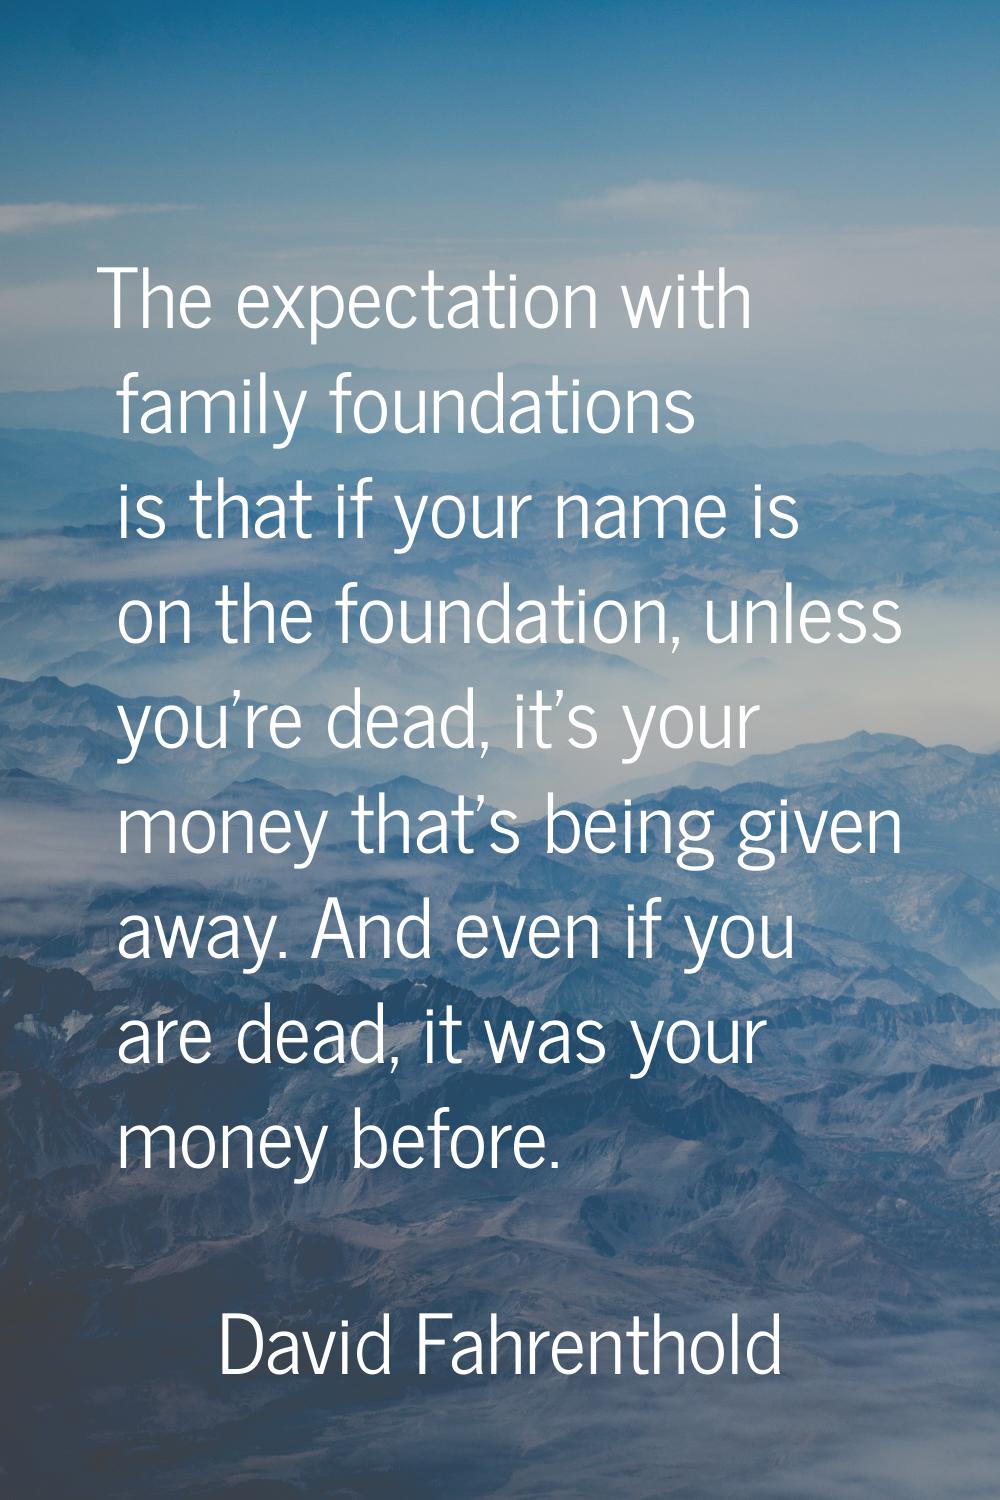 The expectation with family foundations is that if your name is on the foundation, unless you're de